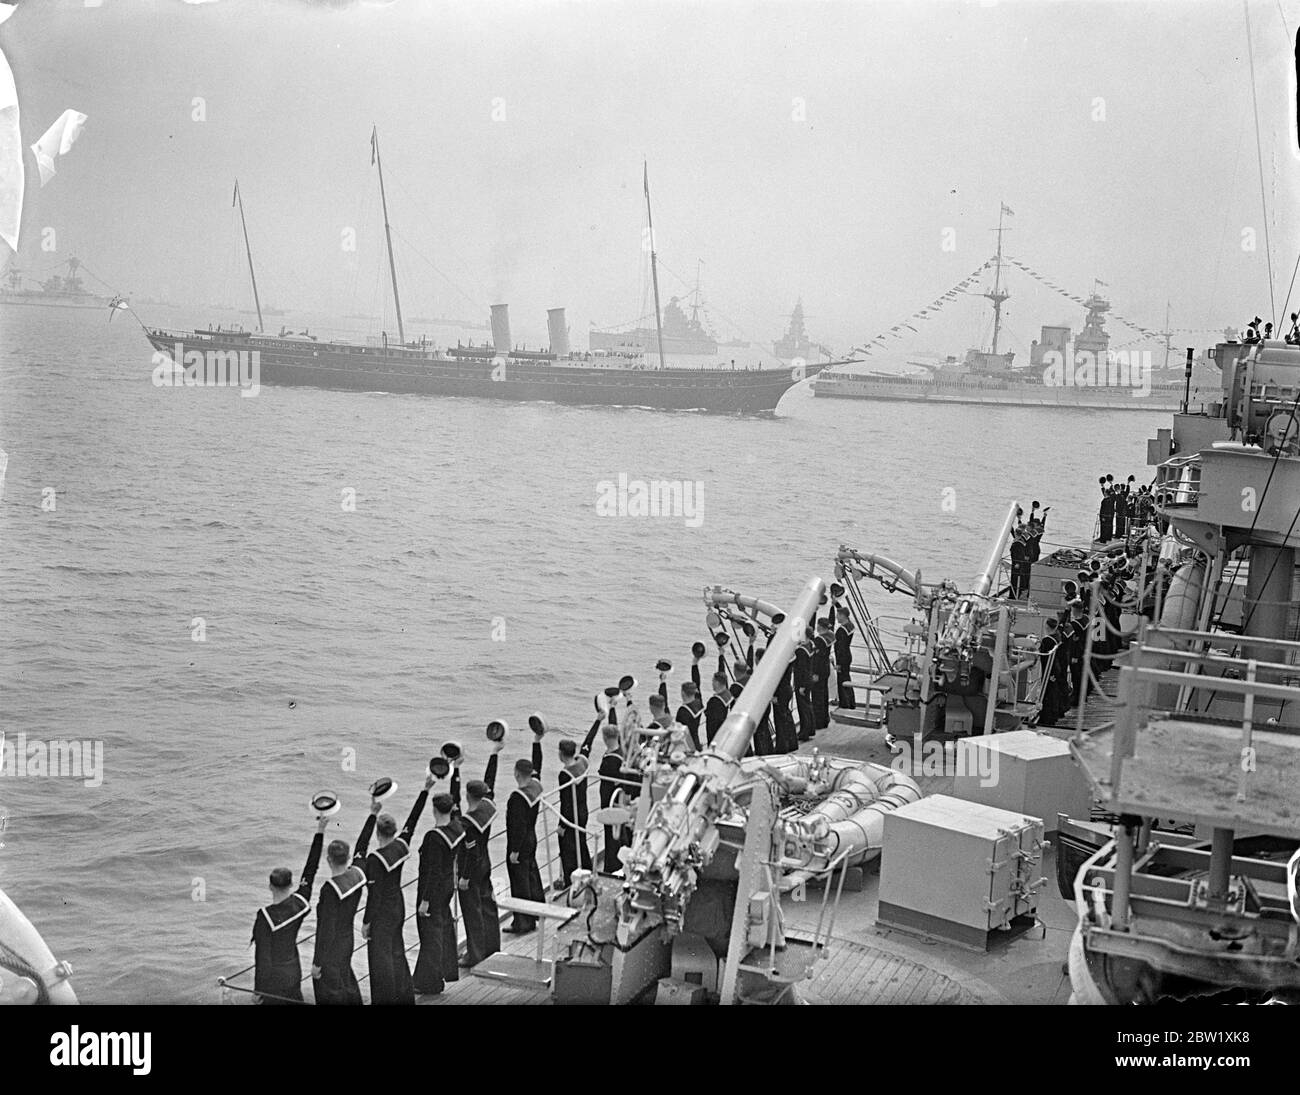 The King reviews fleet at Spithead. Aboard the Royal yacht, 'Victoria and Albert', the King passed through the 5 mile line of 160 warships and merchant vessels when he made his Coronation review of the British Navy and Mercantile Marine at Spithead. Nearly 300 ships, including 17 from the foreign fleets, were reviewed. Photo shows, men of 'HMS London (P 69 ) cheering the Royal yacht 'Victoria and Albert' as she passed down the lines with the King aboard. 20 May 1937 Stock Photo